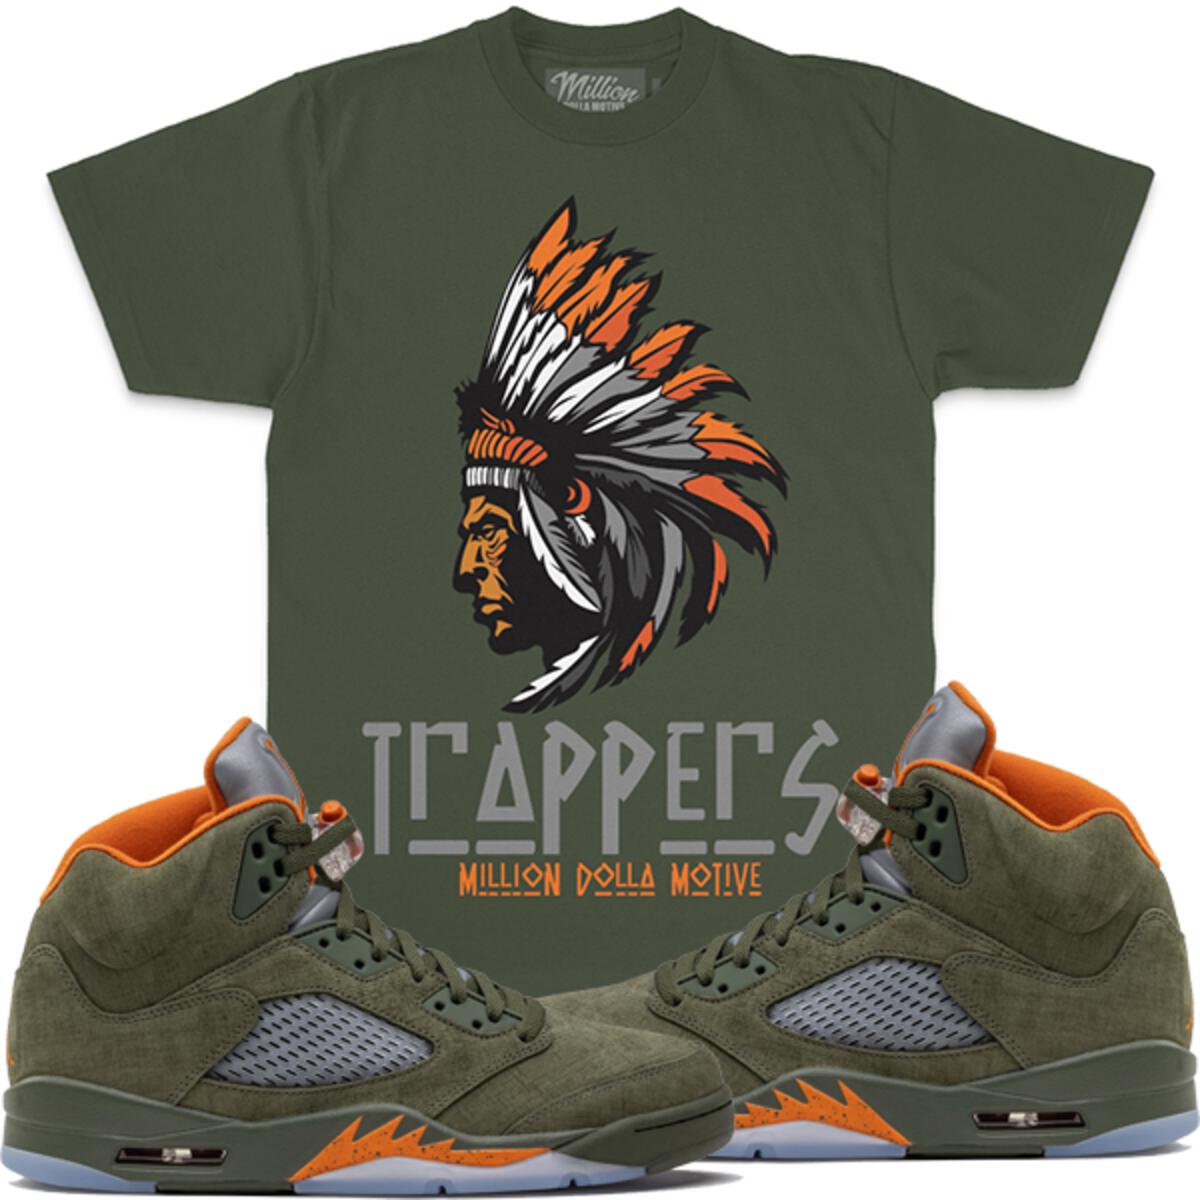 Trappers T-shirt